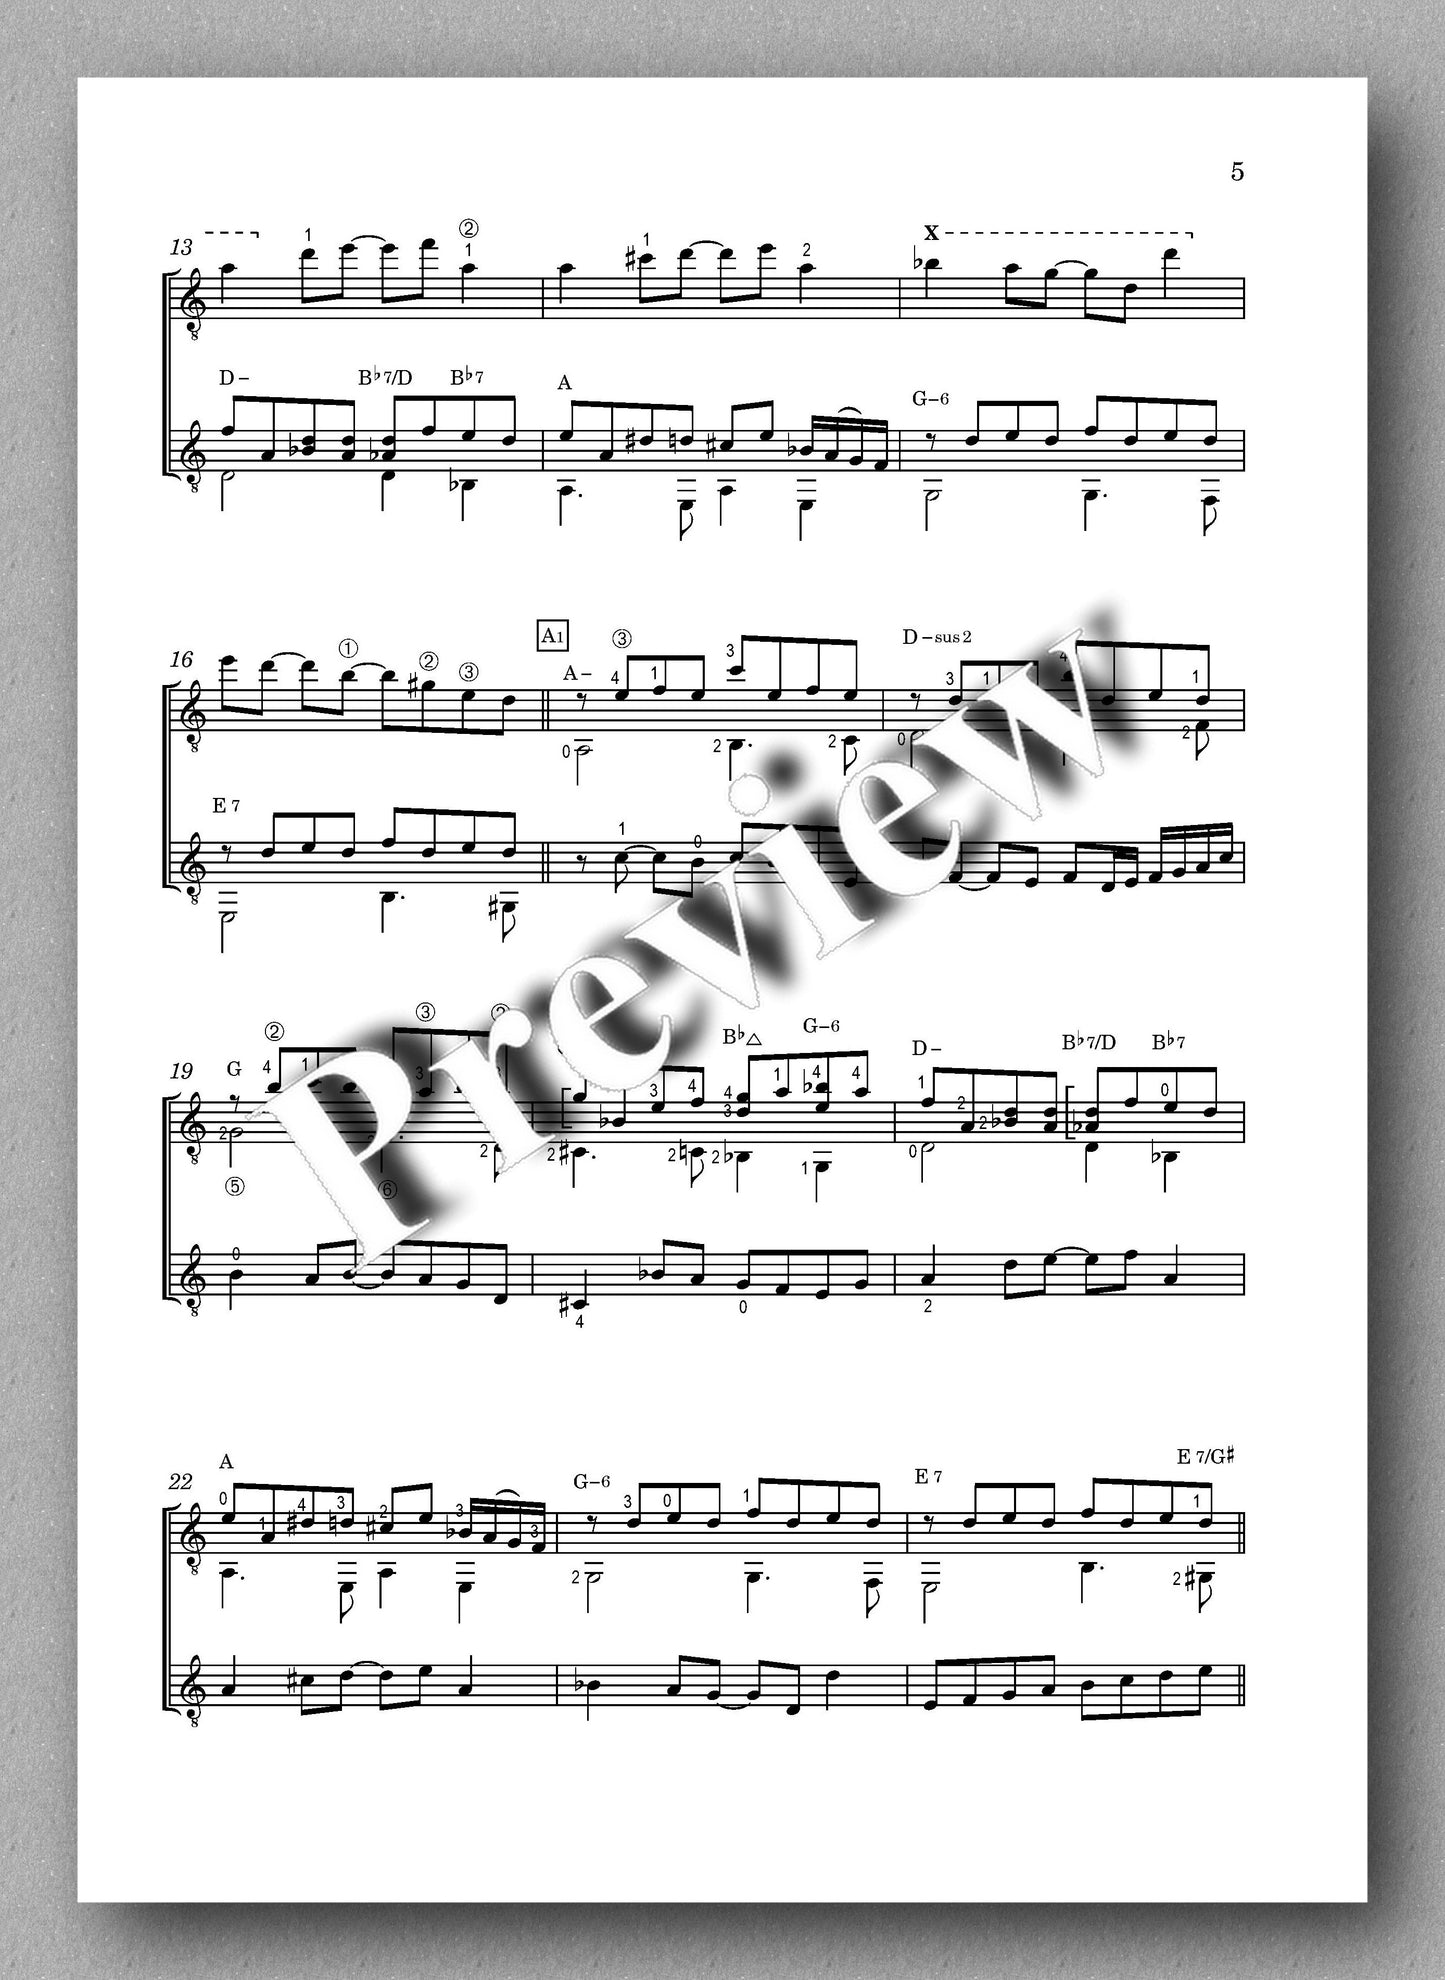 Petrov, Can't Say Goodbye - music score 2